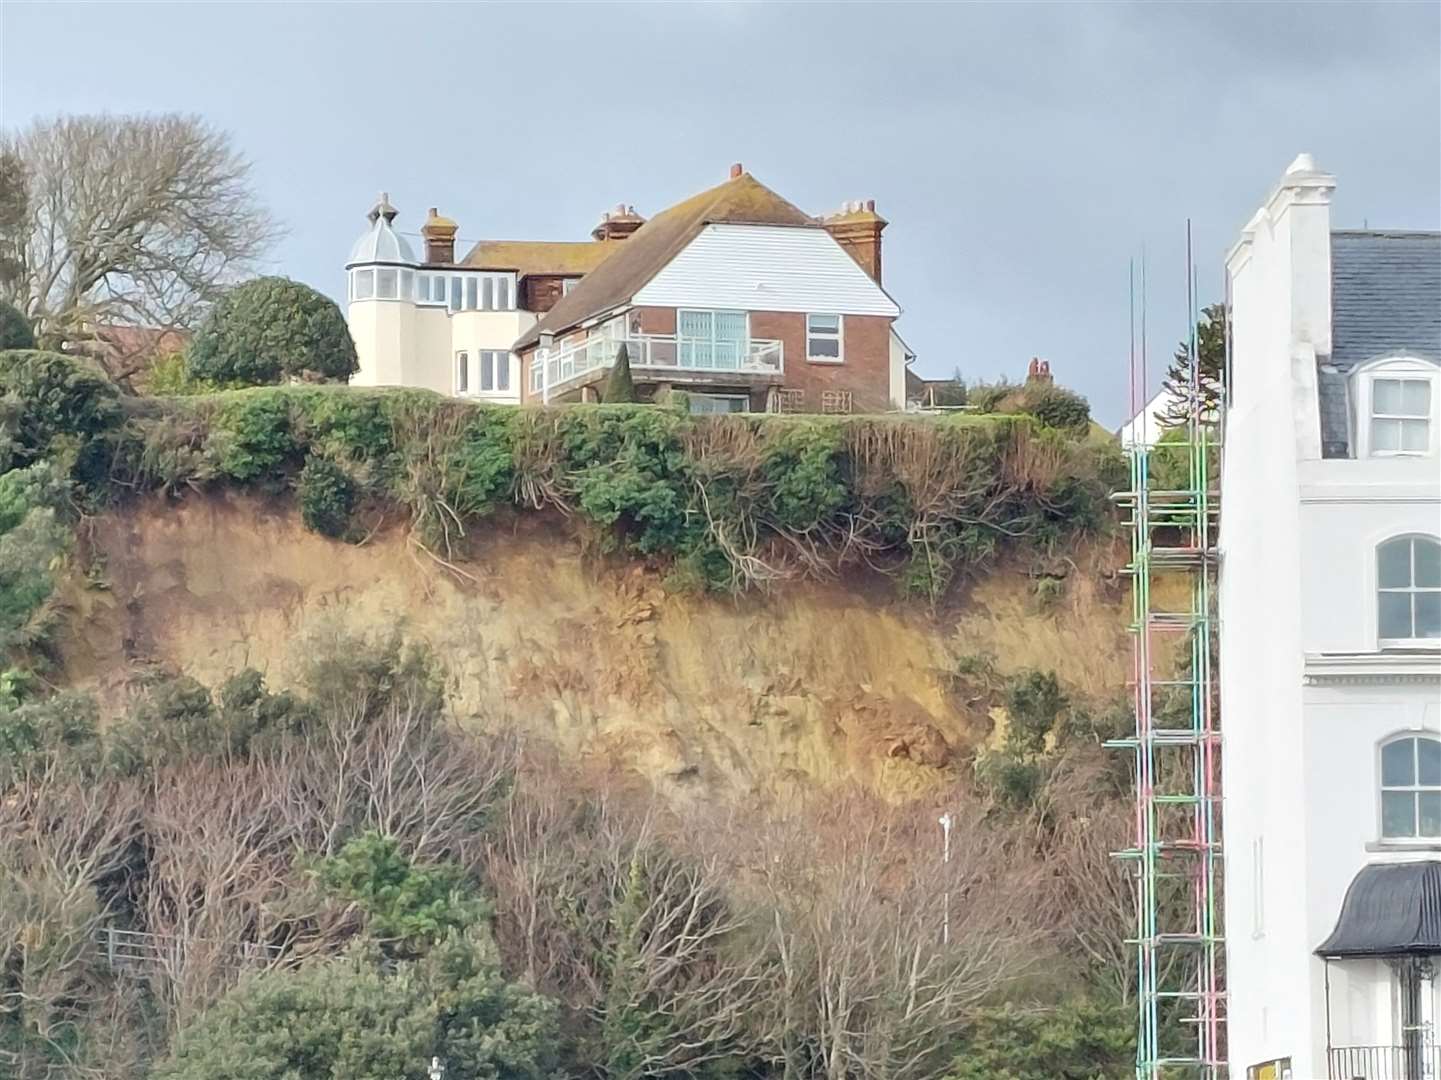 A second landslip hit the Road of Remembrance, Folkestone in February, a few weeks after the first one brought trees crashing down